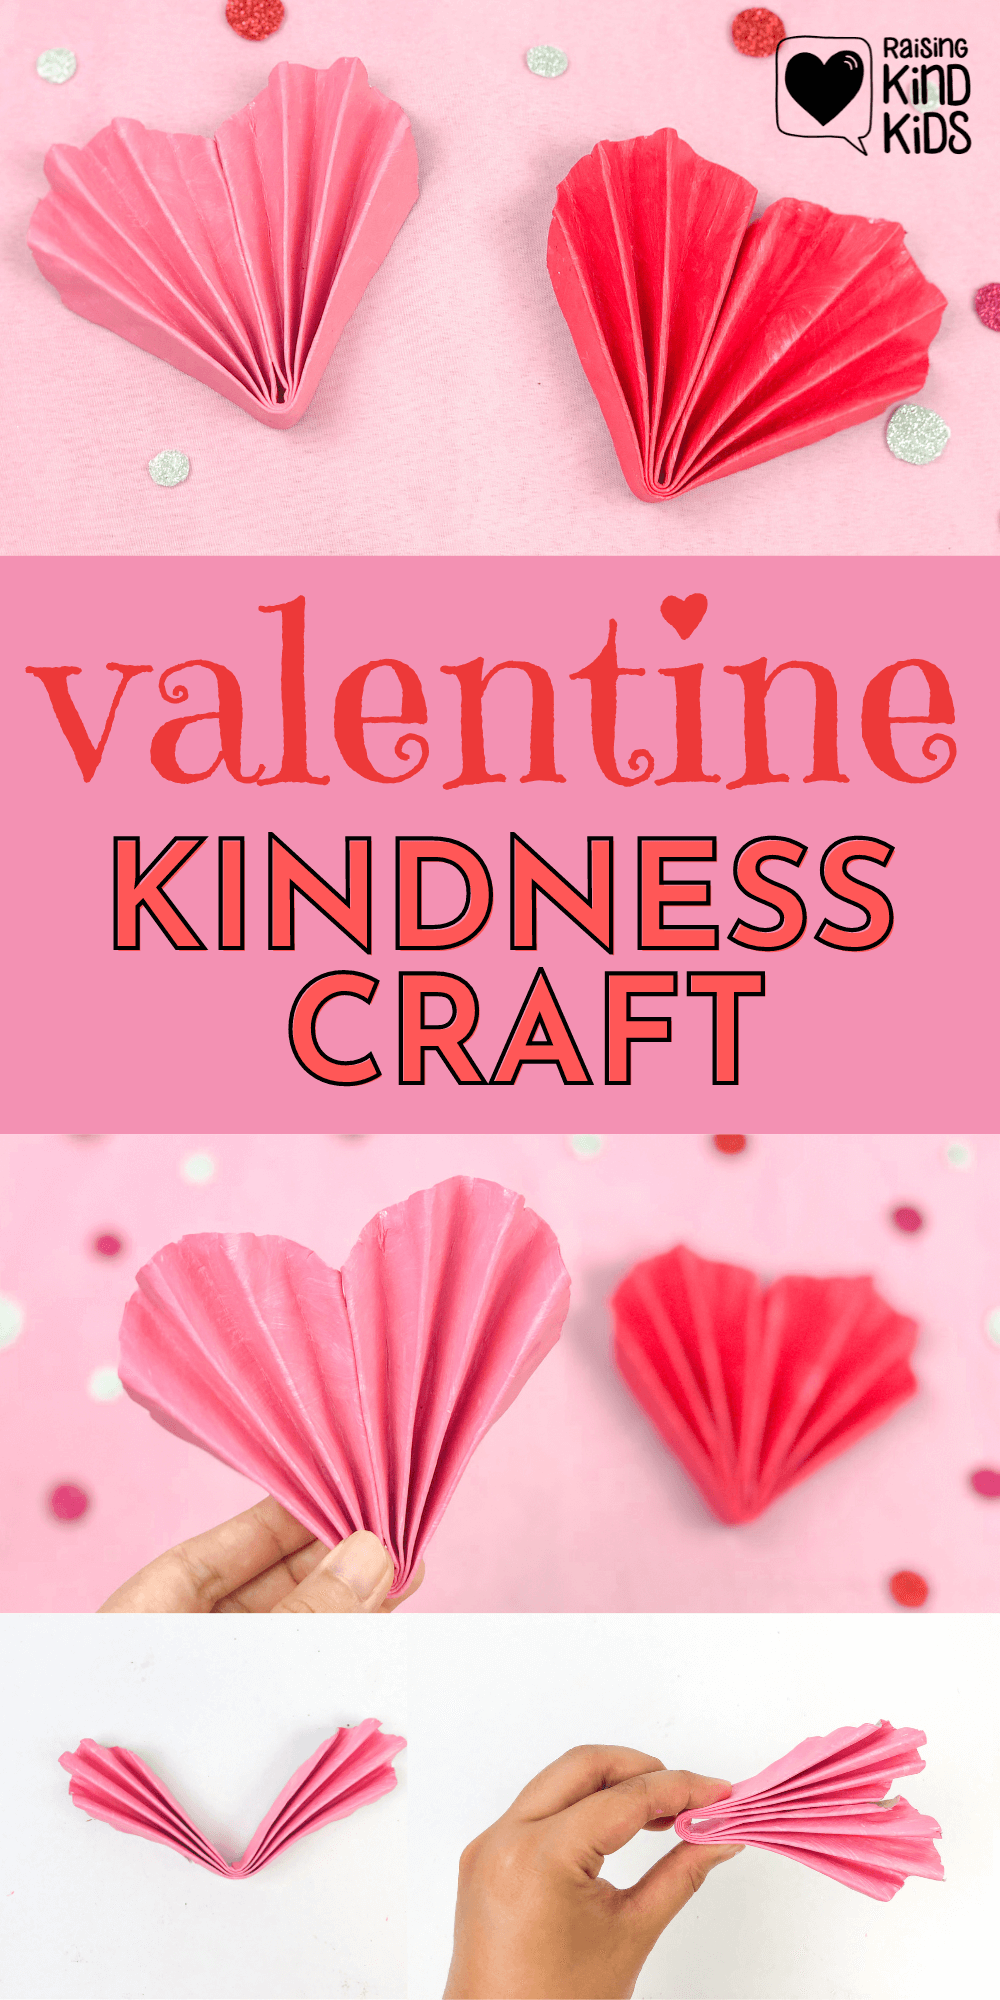 Use this heart paper plate craft to spread some kindness this Valentine's Day to friends, family and neighbors. 